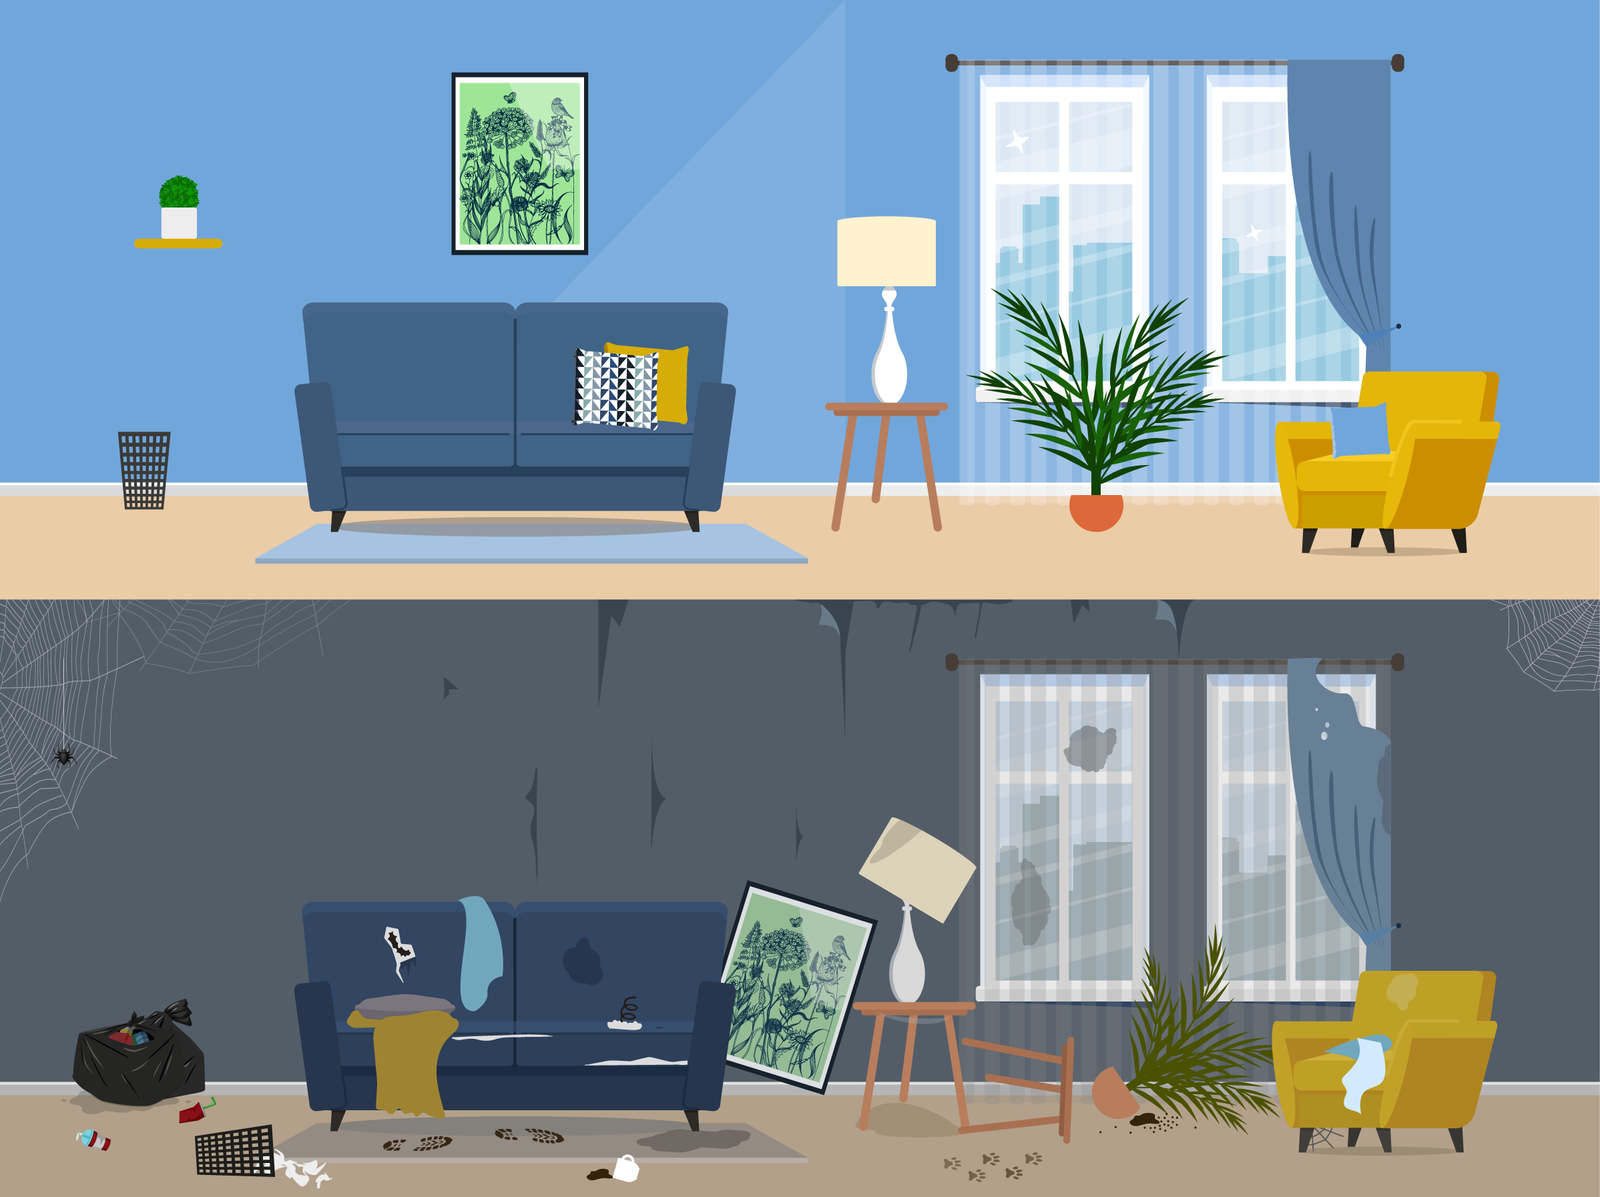 Clean and dirty room infographic by KateDro on Dribbble